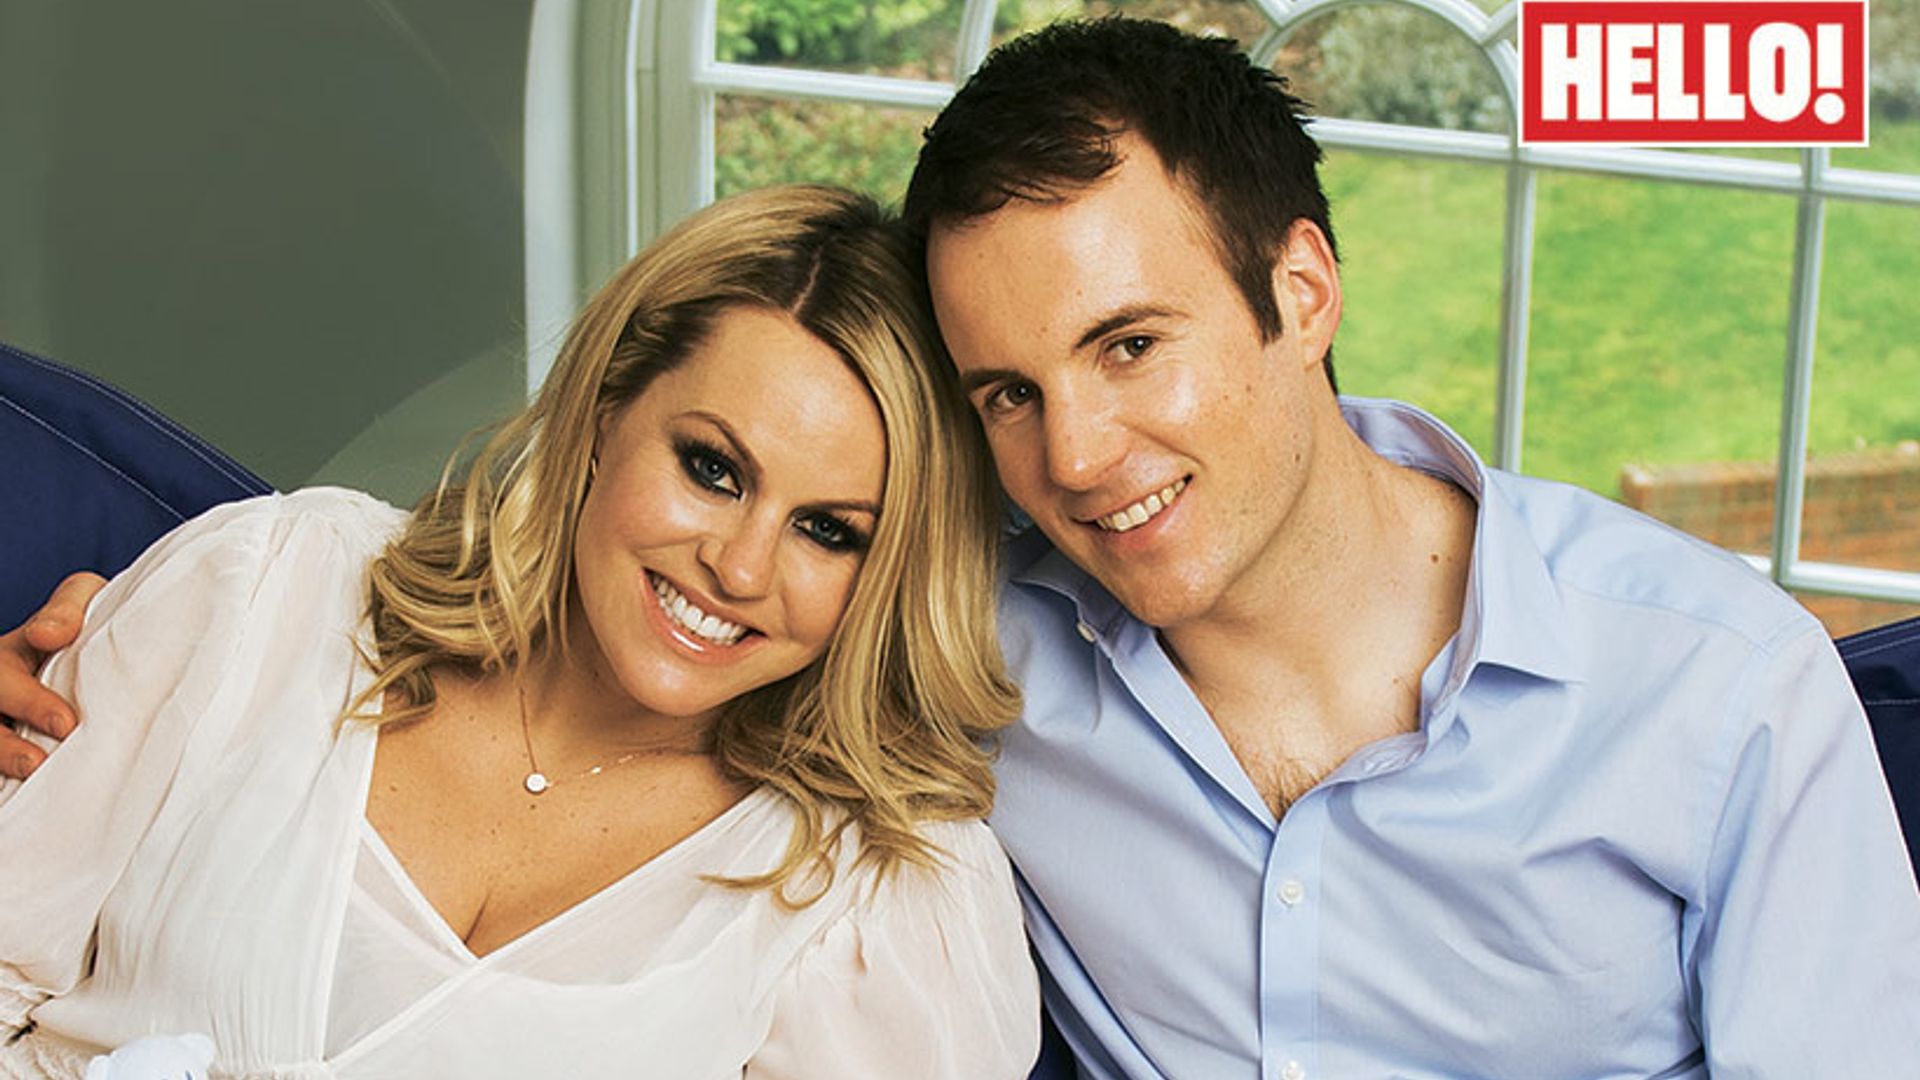 Olympic skier Chemmy Alcott welcomes second baby with husband Dougie Crawford